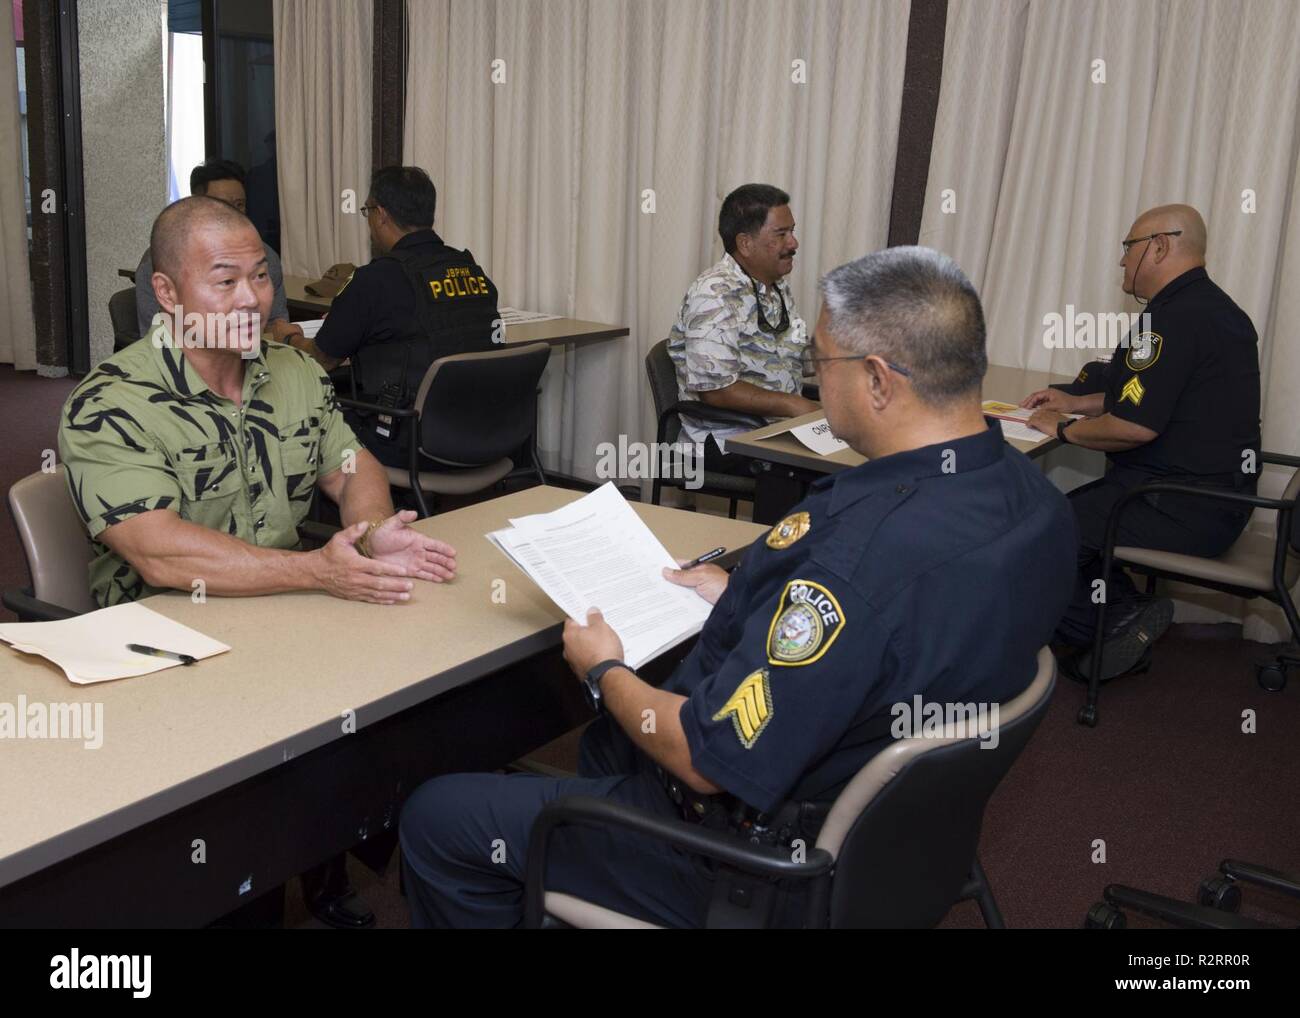 HONOLULU (Nov. 5, 2018) Spencer Kam, of Pearl City, Hawaii, answers  questions during an interview for a security guard position at a job fair  held at the Federal Fire Department on Joint